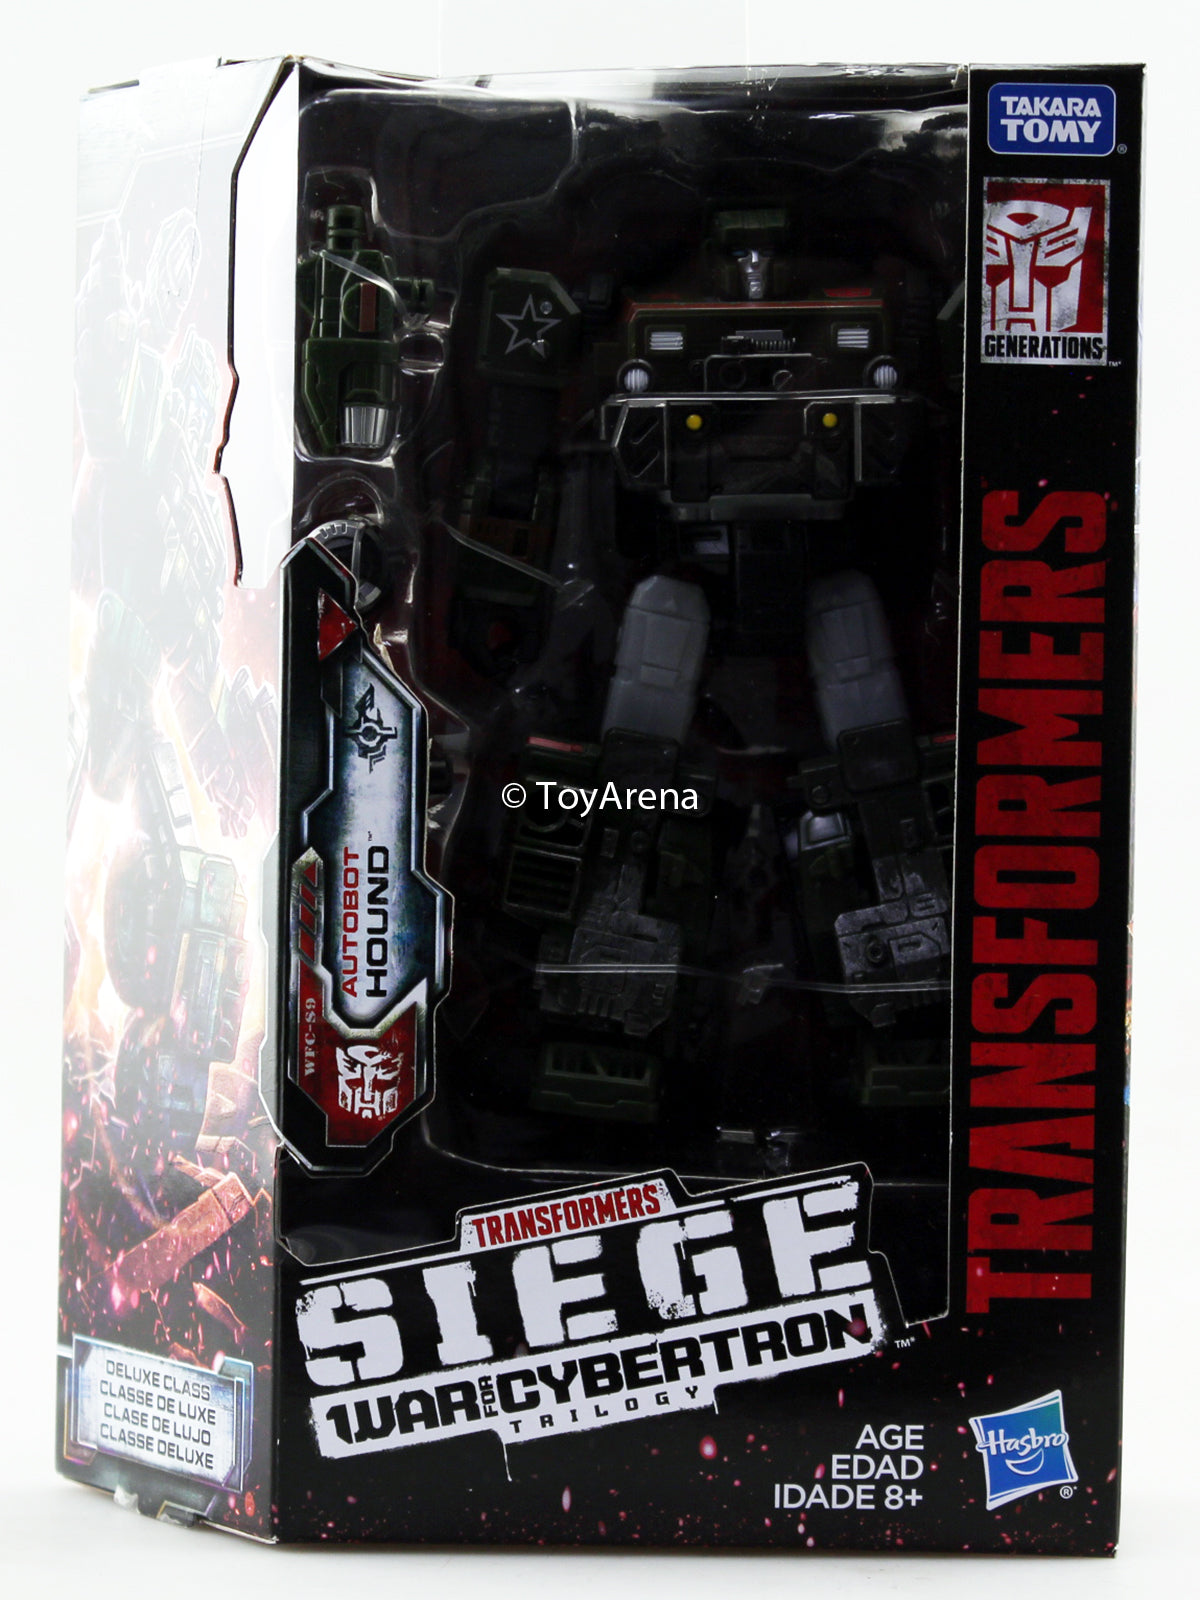 Transformers Generations War For Cybertron: Siege Deluxe Autobot Hound Action Figure WFC-S9